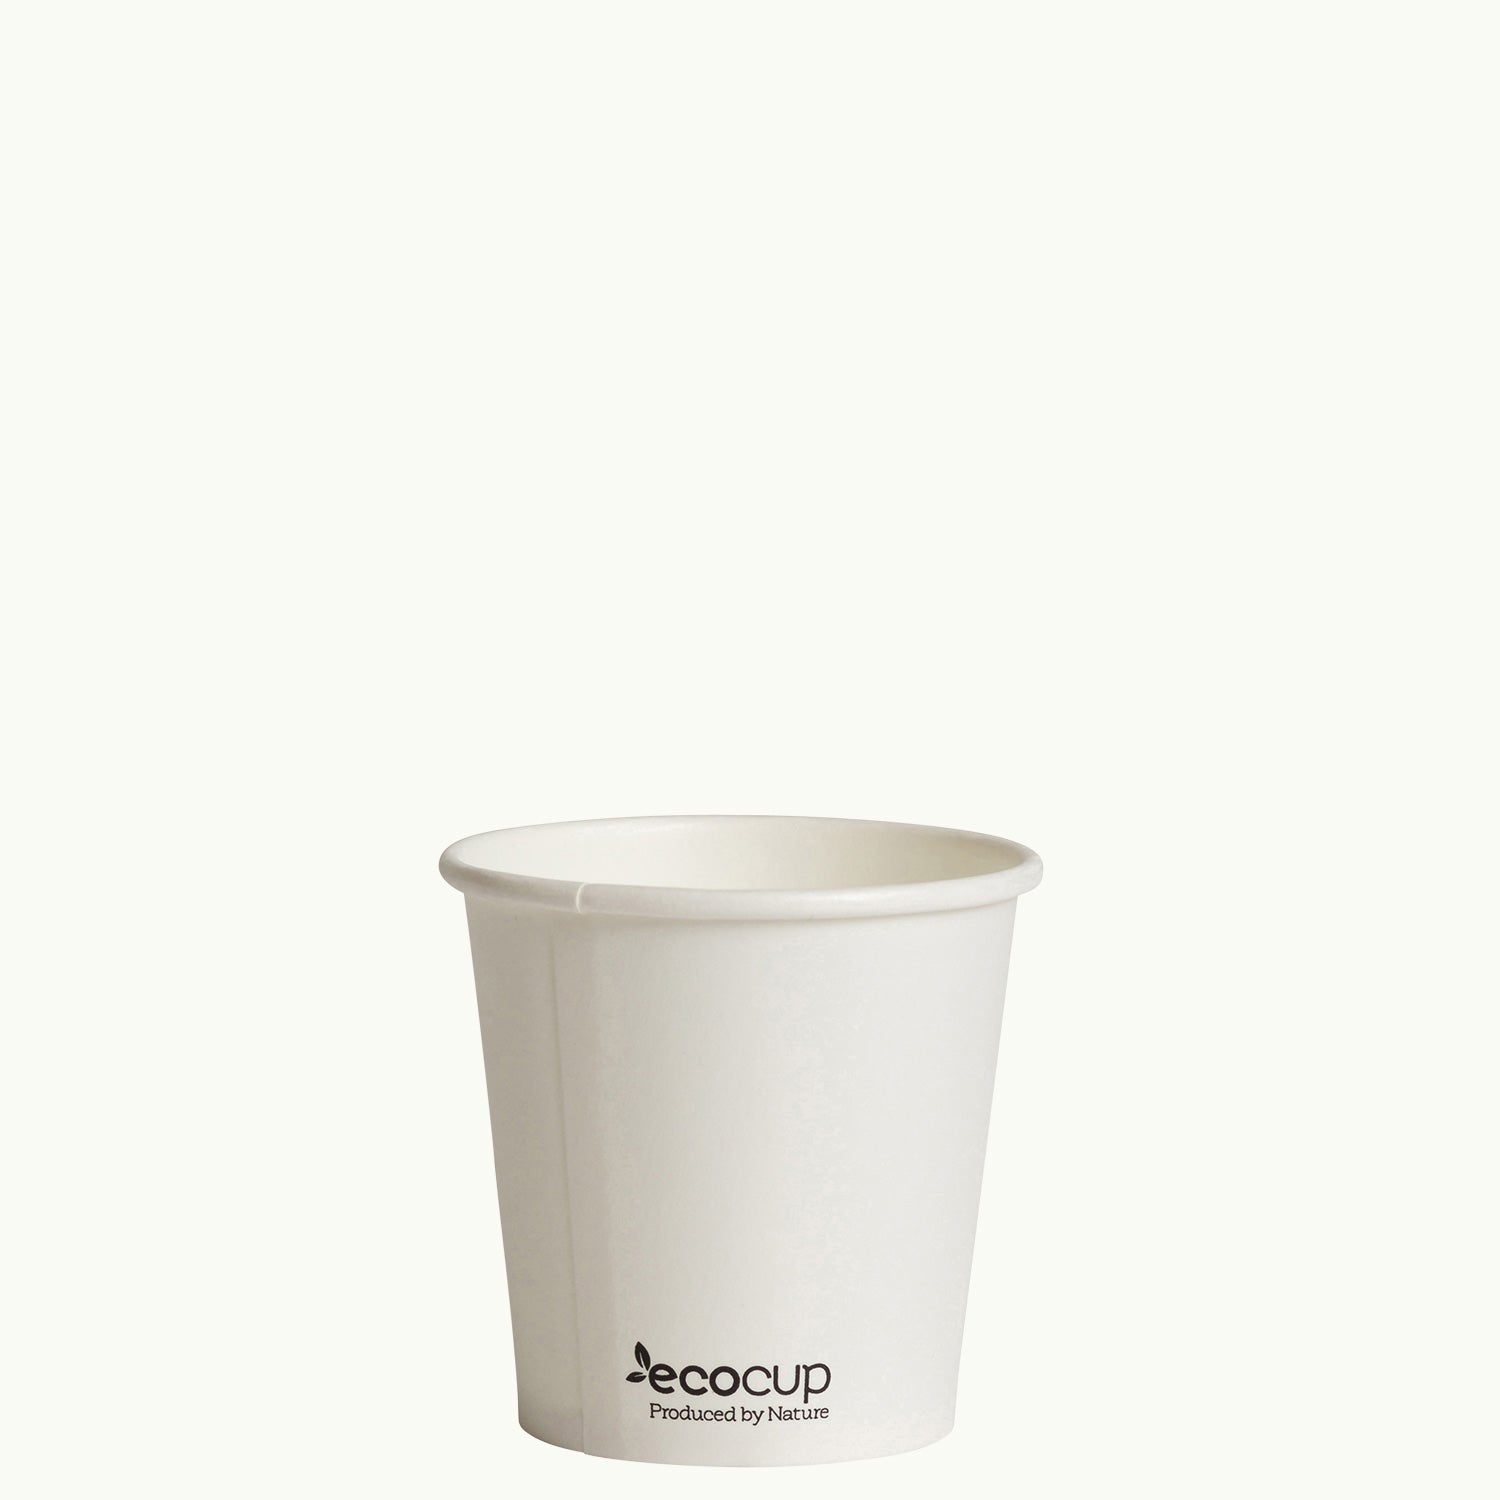 Single Wall Coffee Cup EcoCup - WHITE - FSC MIX 110 ml